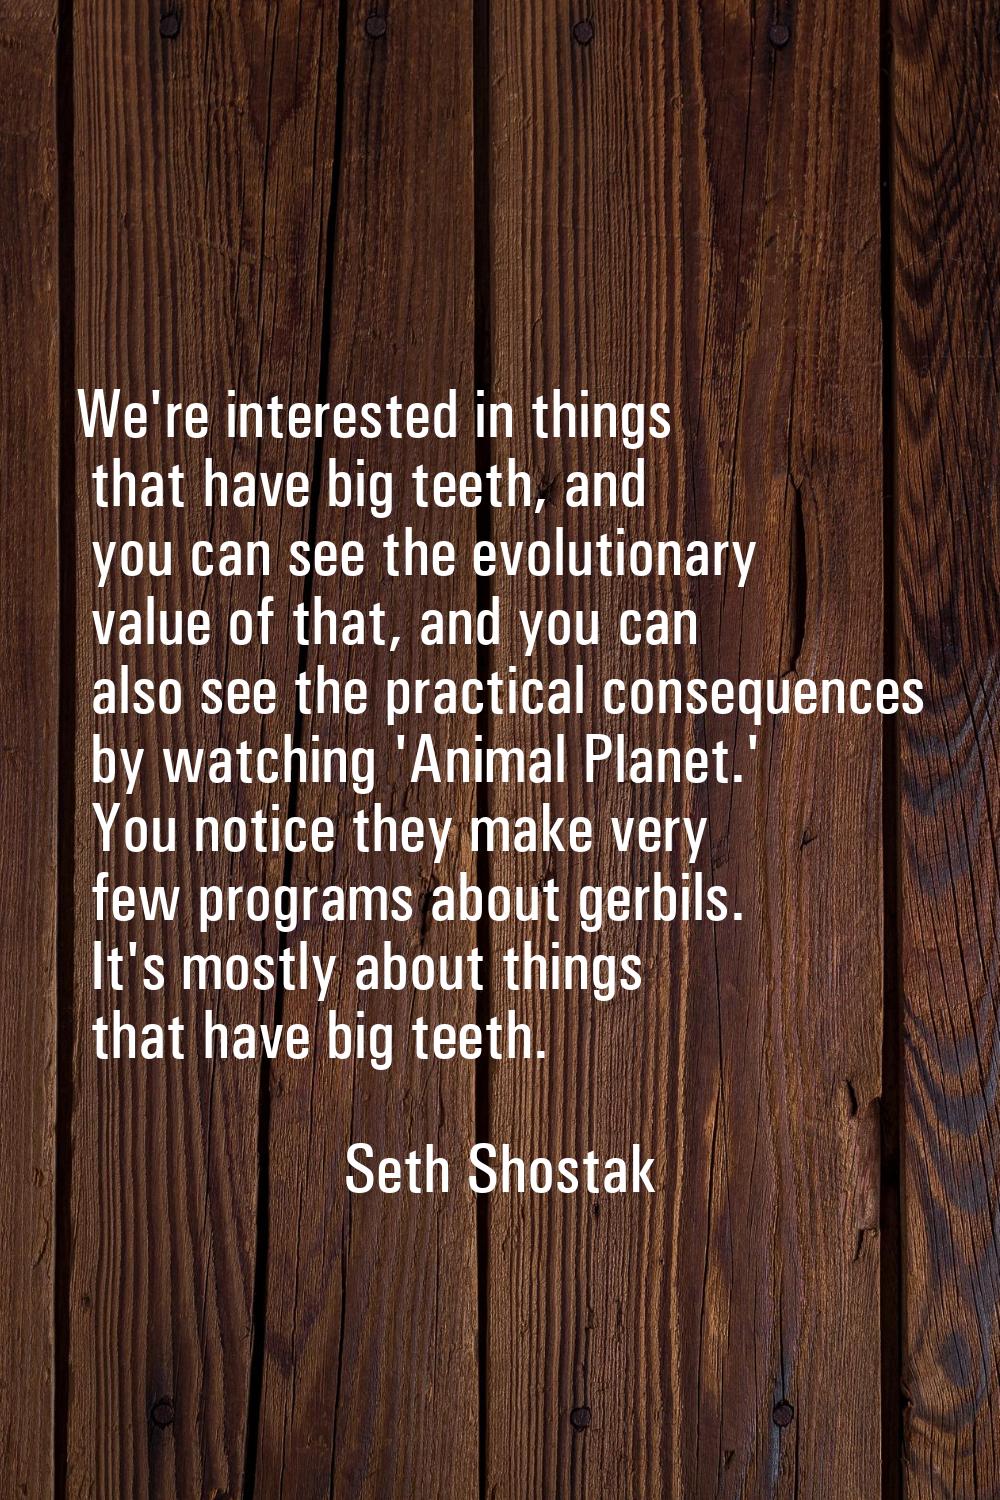 We're interested in things that have big teeth, and you can see the evolutionary value of that, and